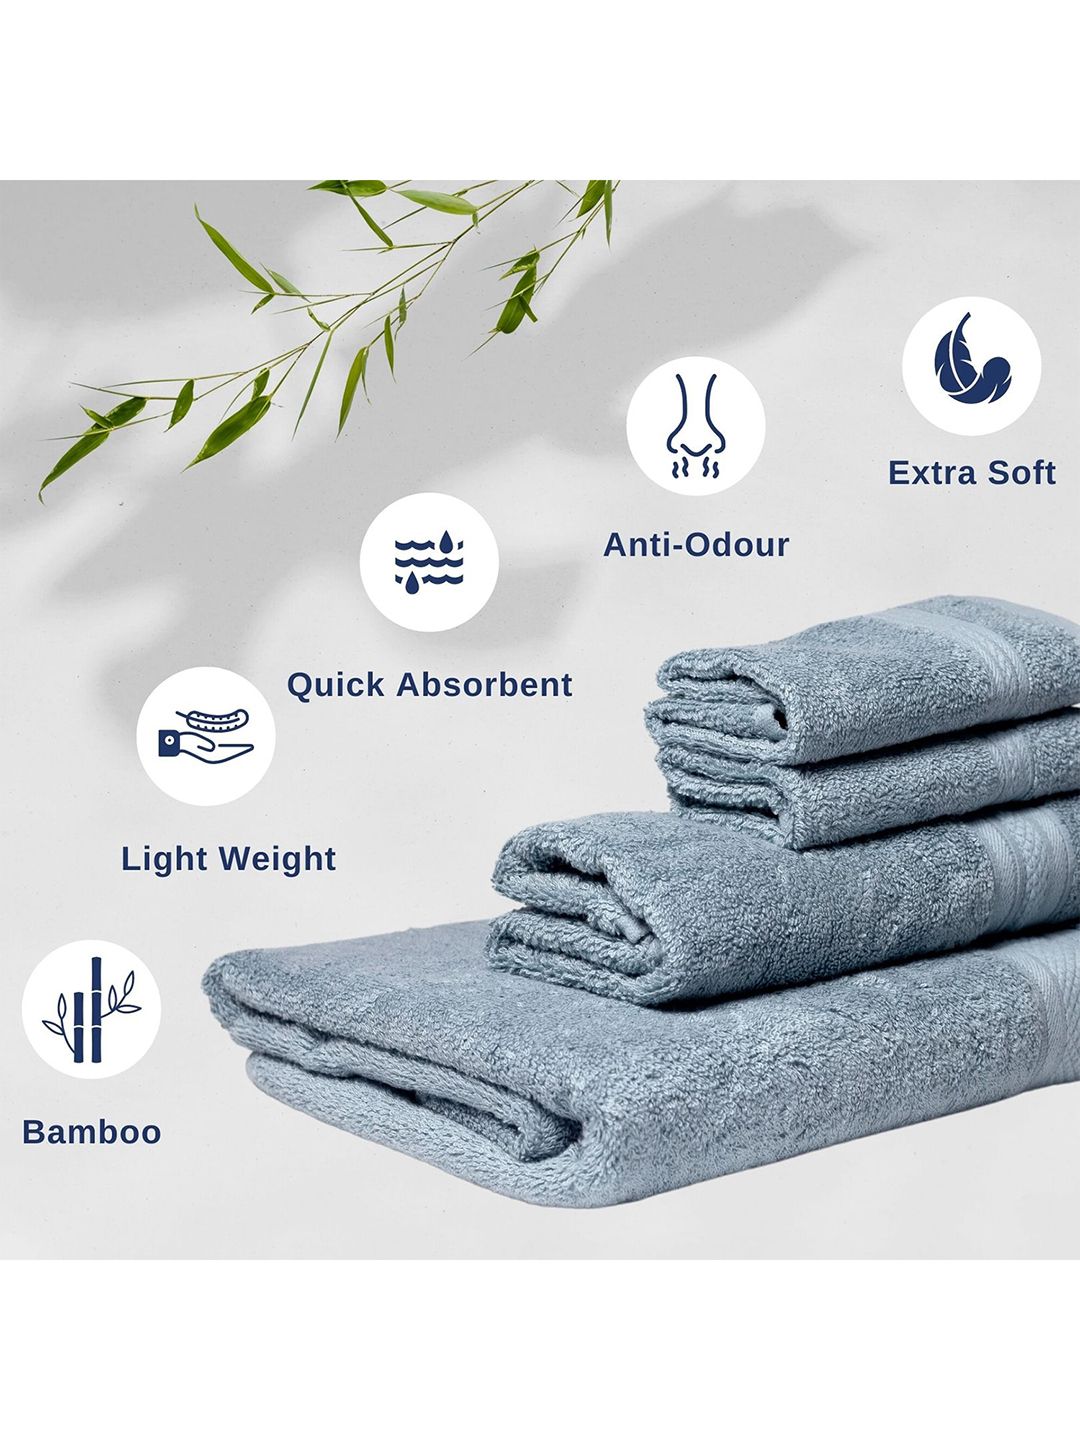 Kawach Unisex Blue Solid Antimicrobial Soft Bamboo Towel Price in India